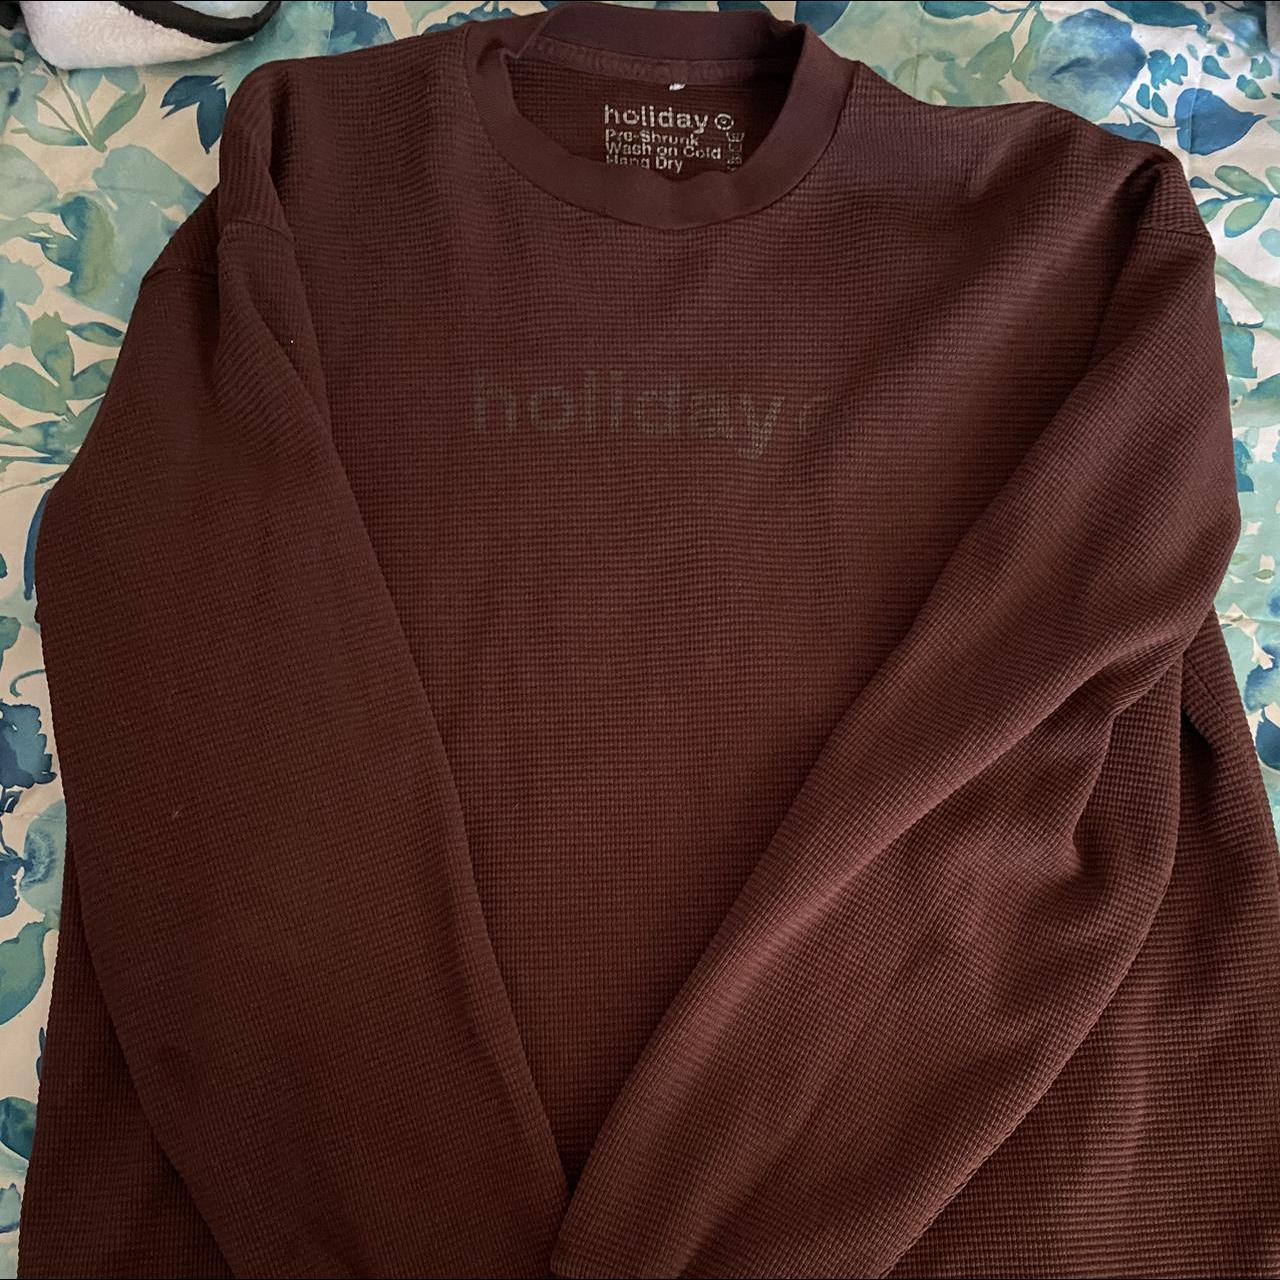 Holiday The Label Men's Brown Jumper